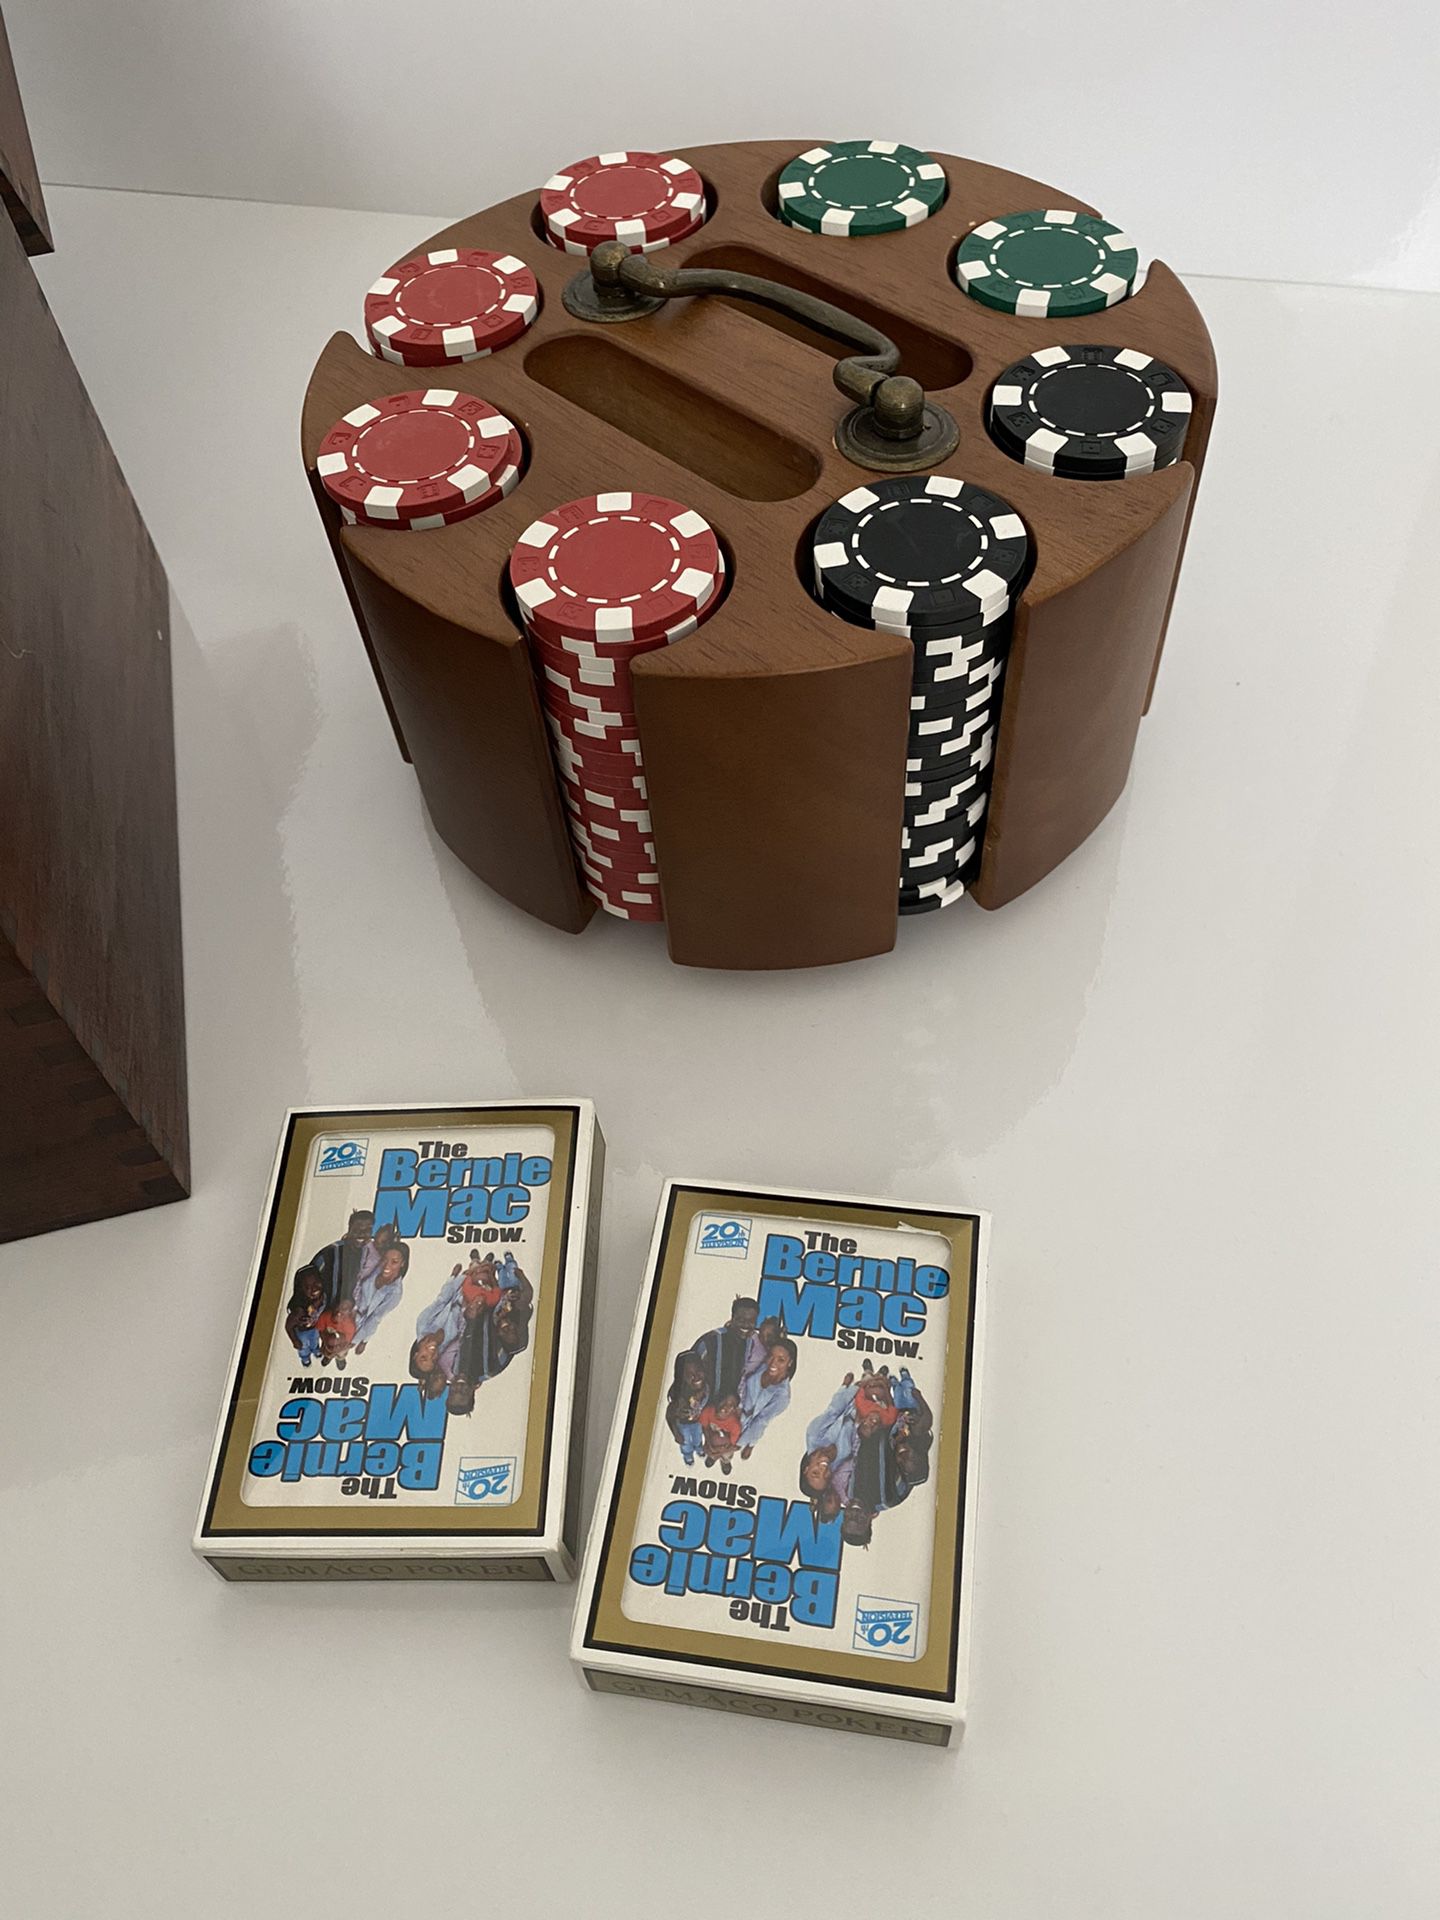 Poker Chip Set in "The Bernie Mac Show" Carrying Case